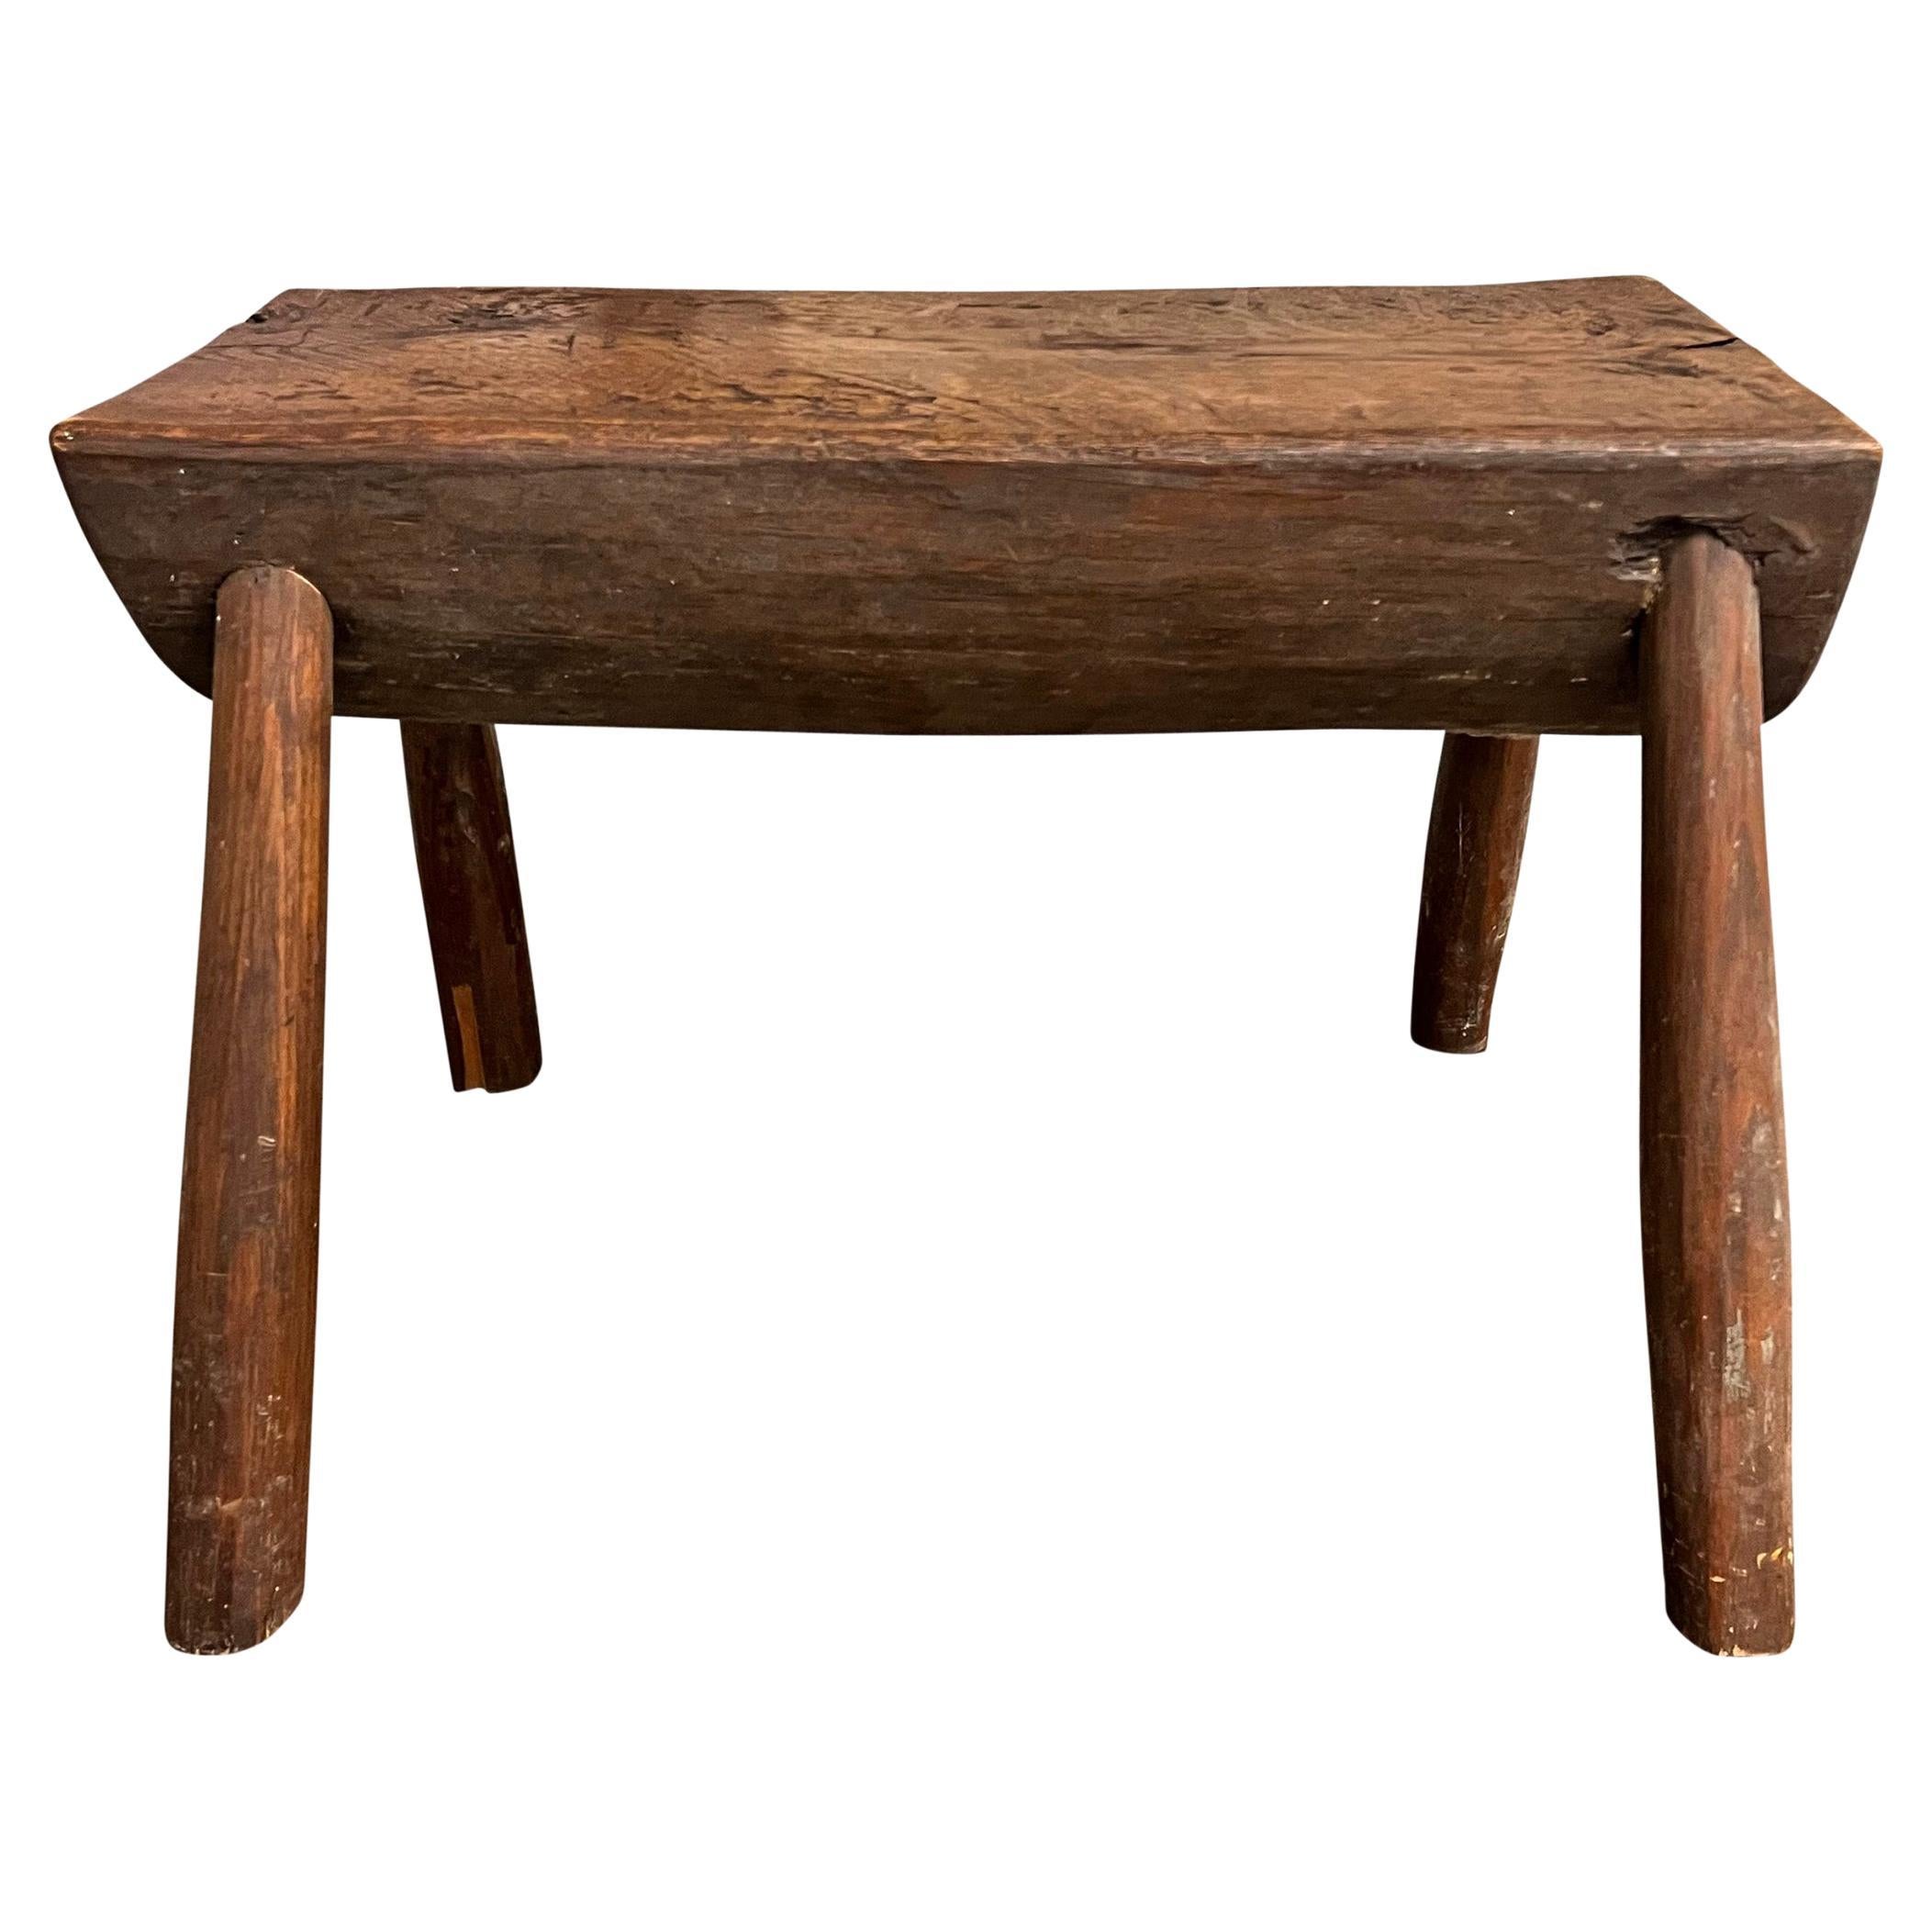 Early 20th Century American Primitive Milking Stool For Sale